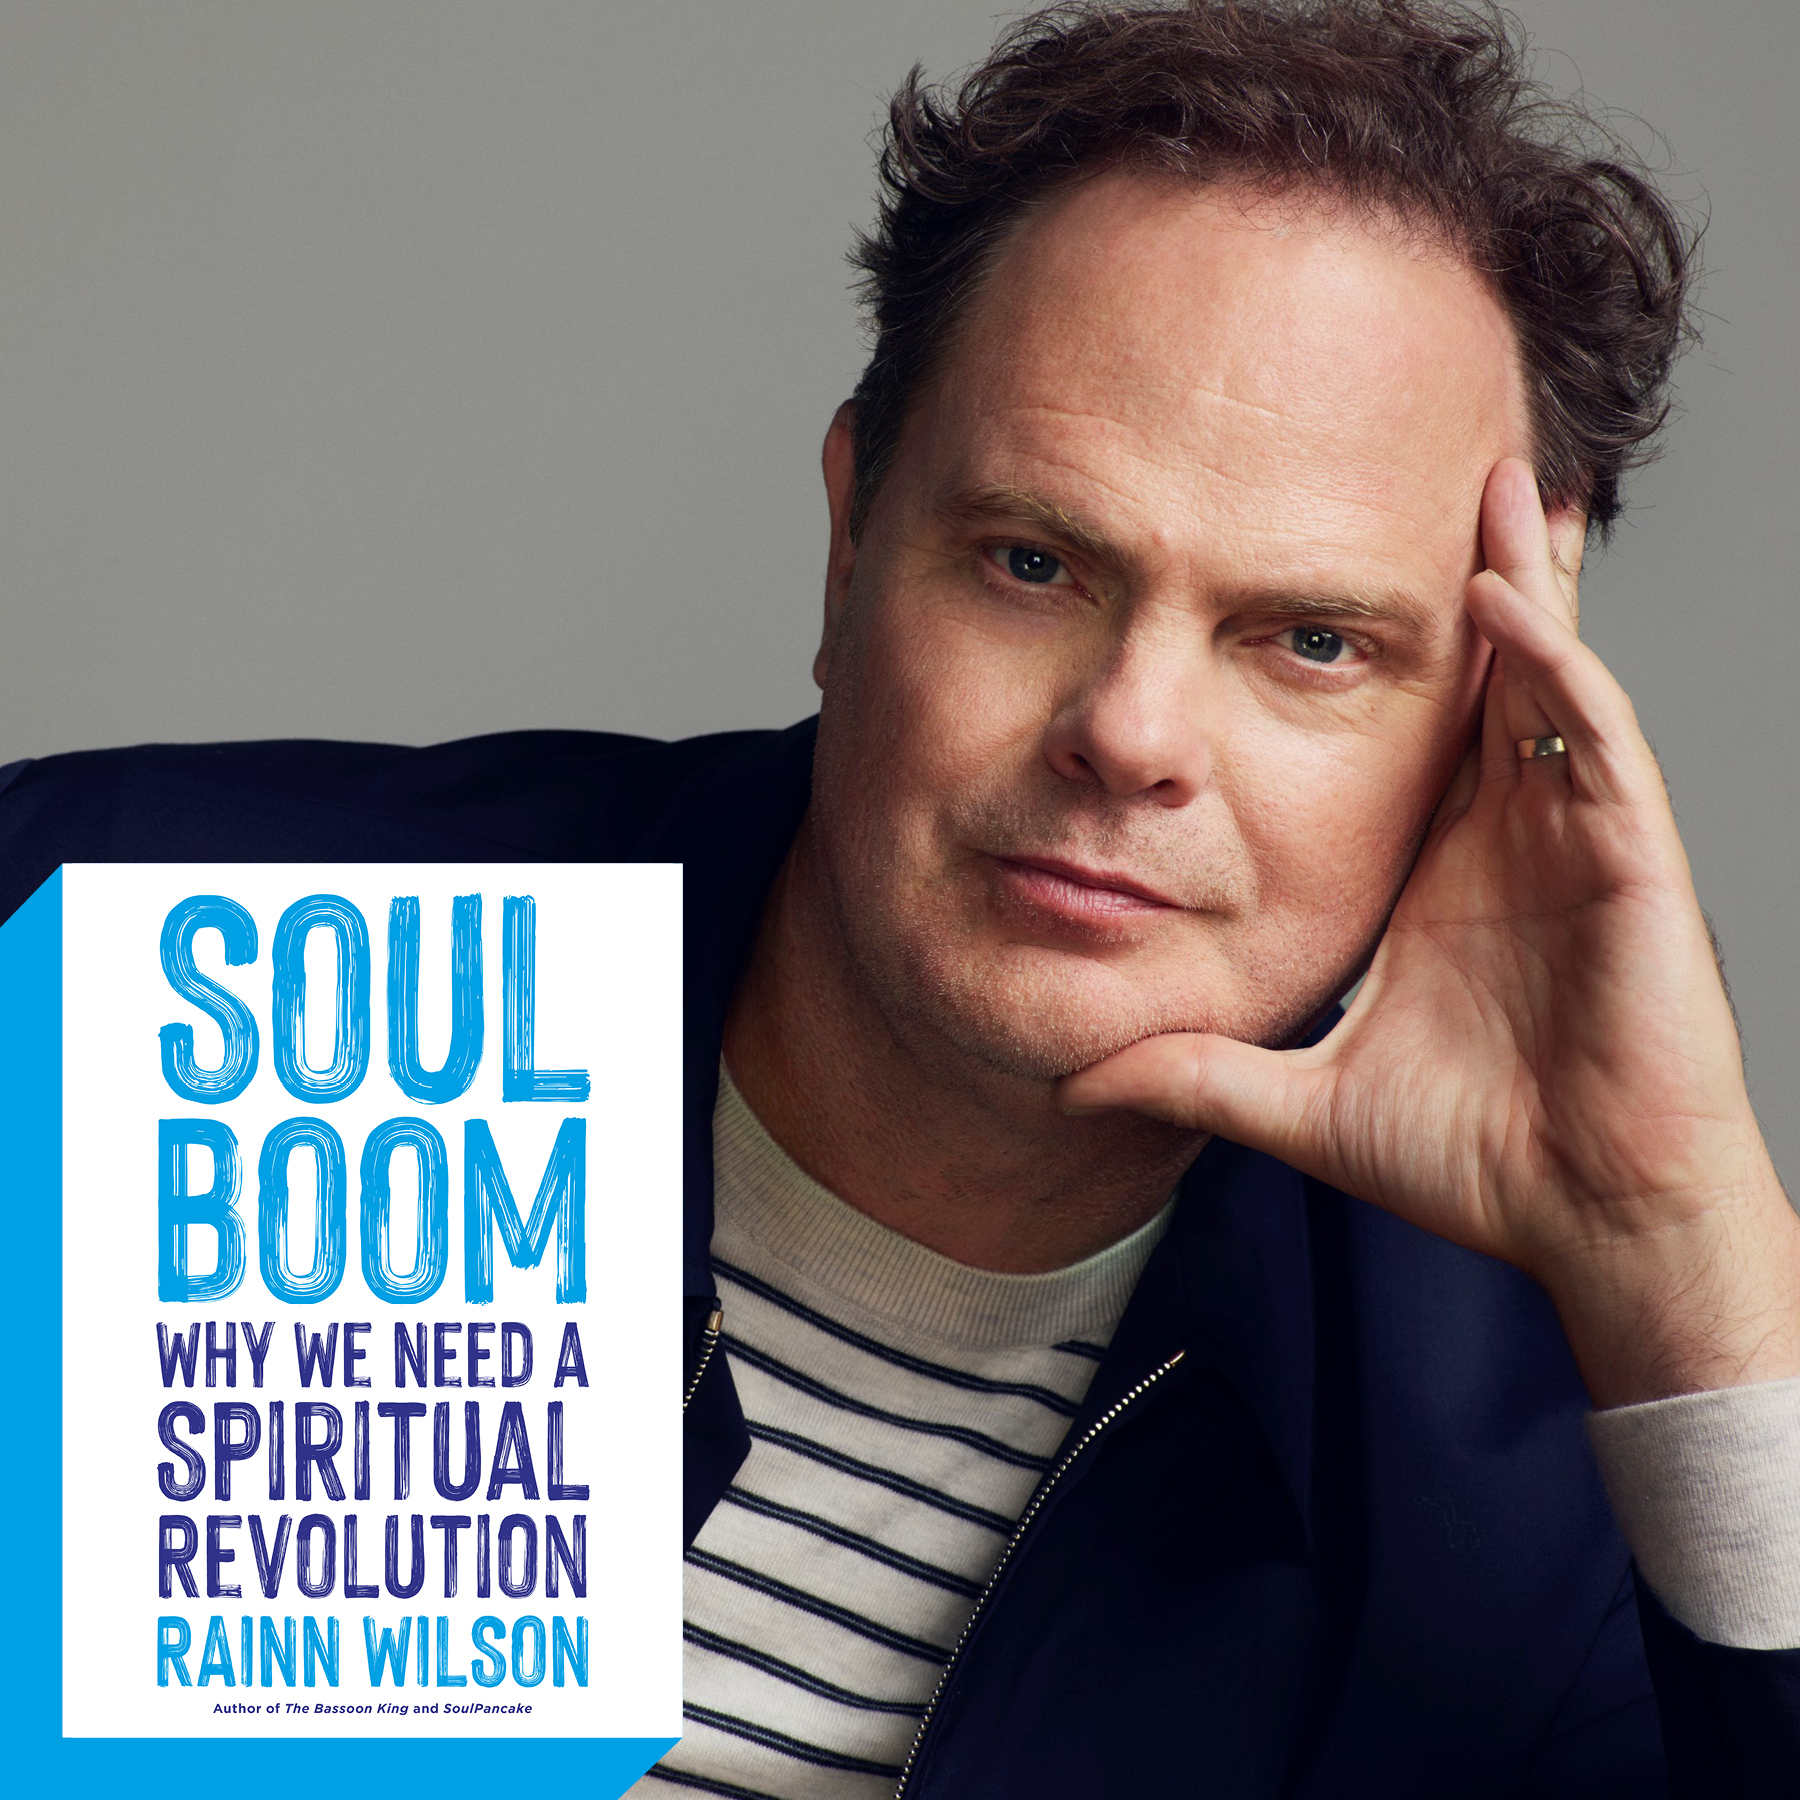 Image for An Evening with  Rainn Wilson  Presented by the Midtown Scholar Bookstore